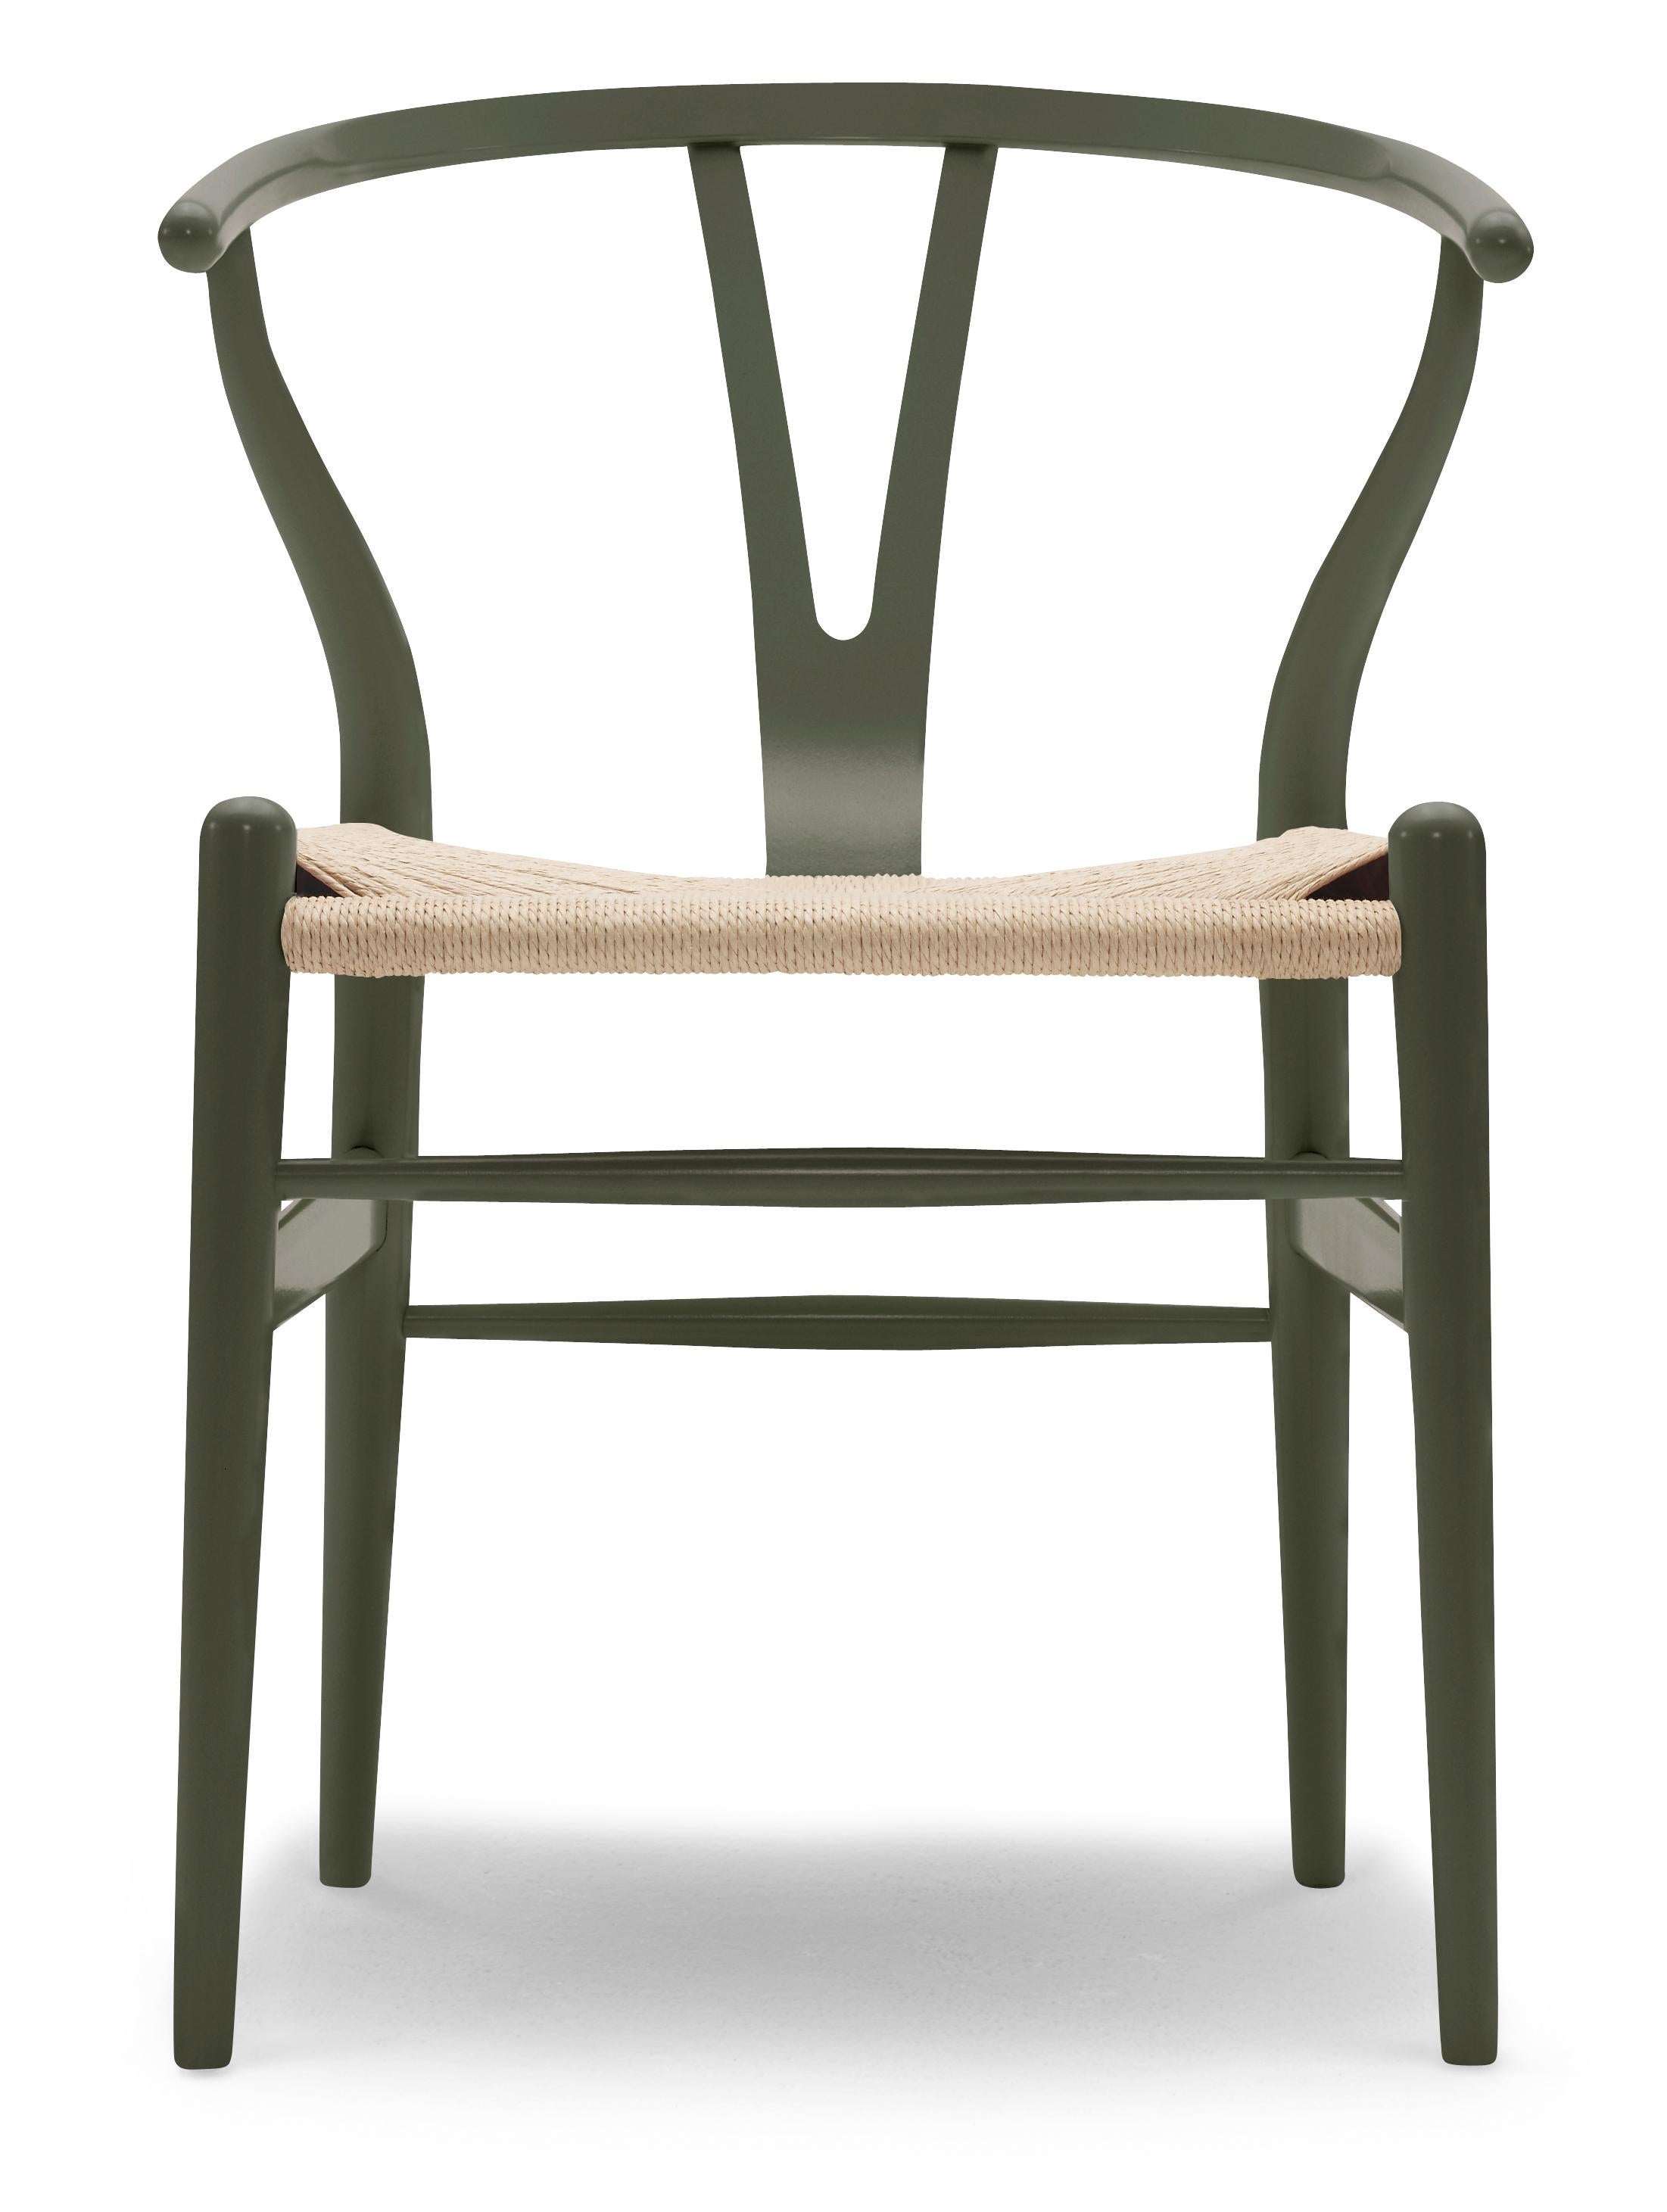 Green (NCS S6020-G50Y) CH24 Wishbone Chair in Color Finishes with Natural Papercord Seat by Hans Wegner